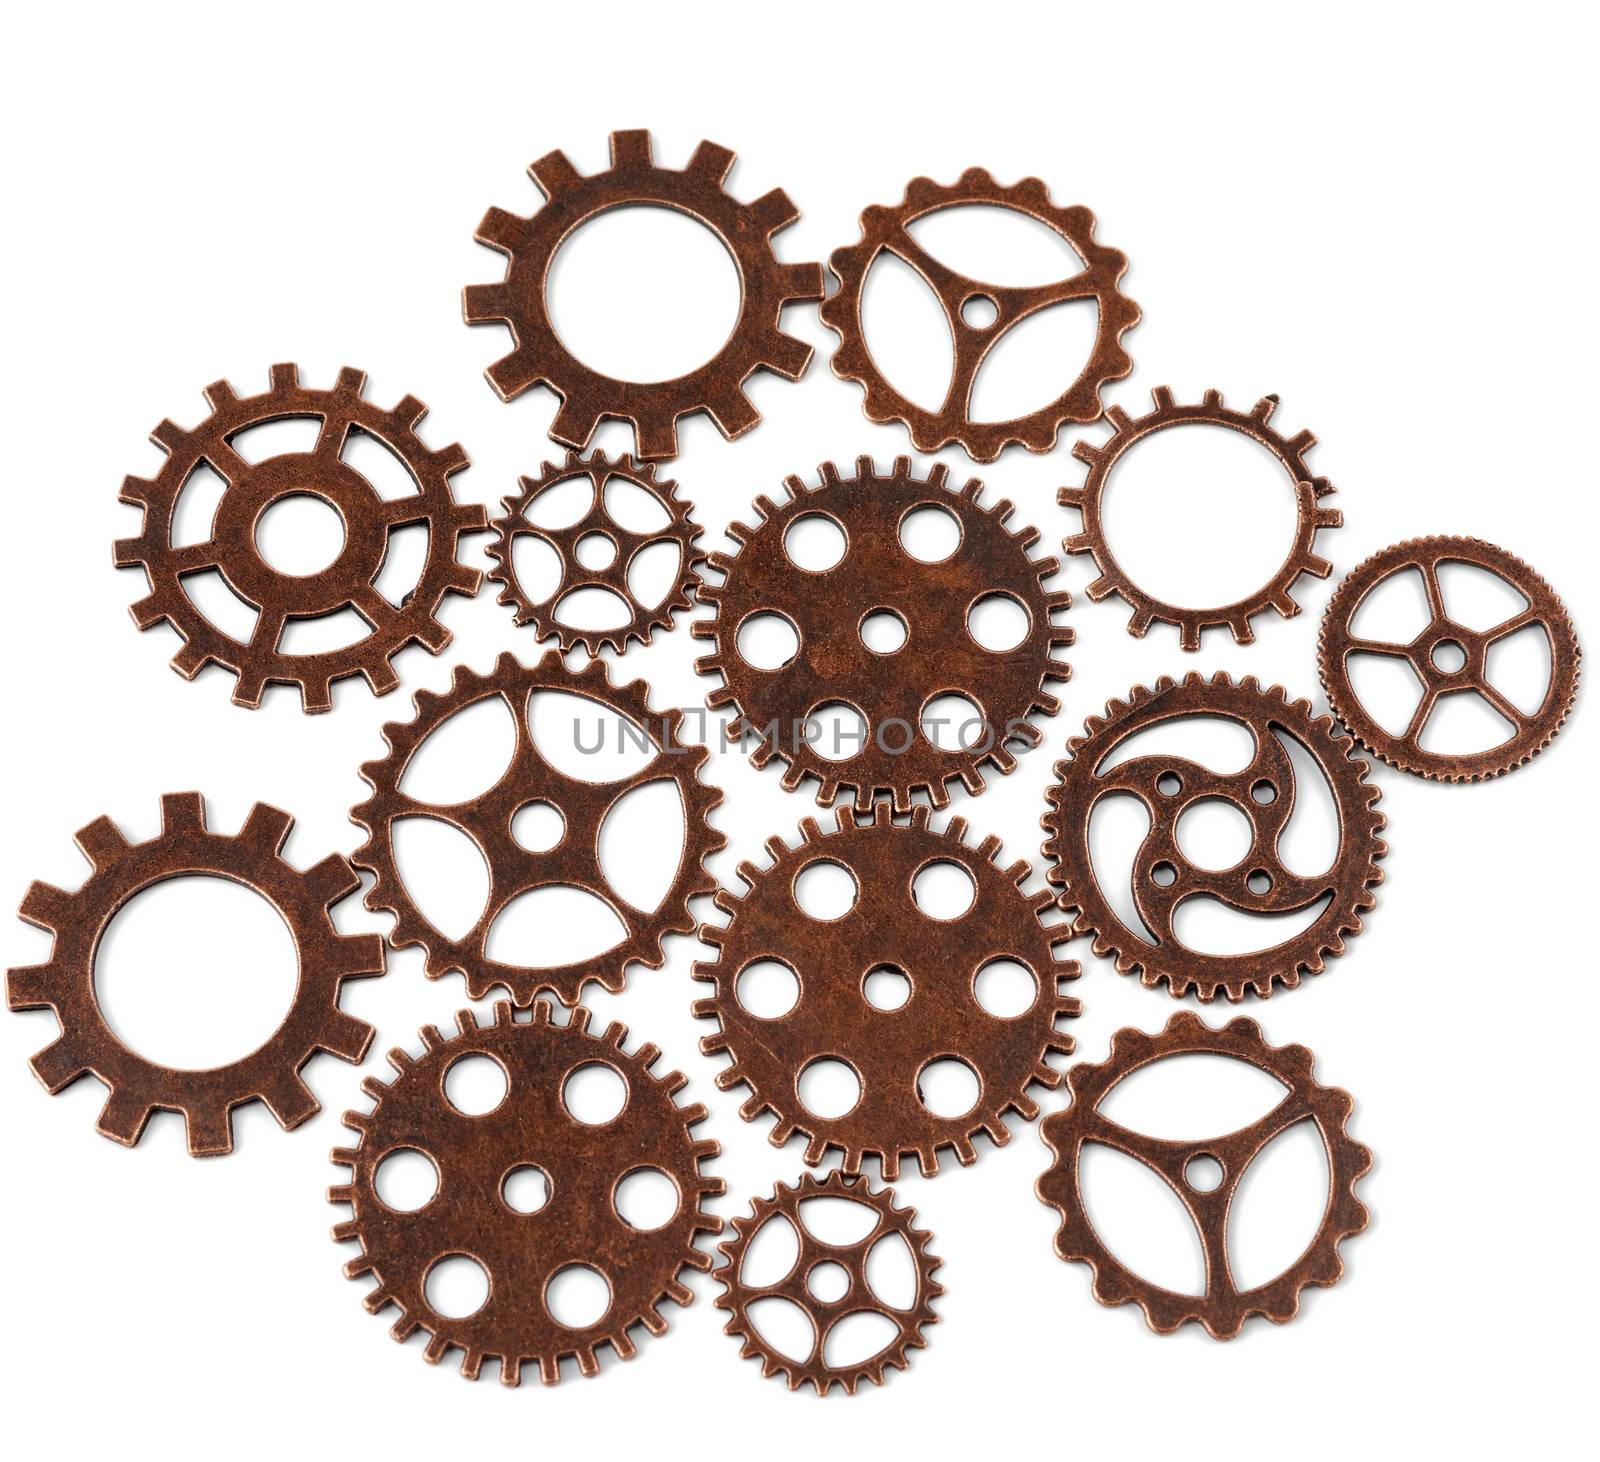 copper various cogs isolated on white background by ndanko